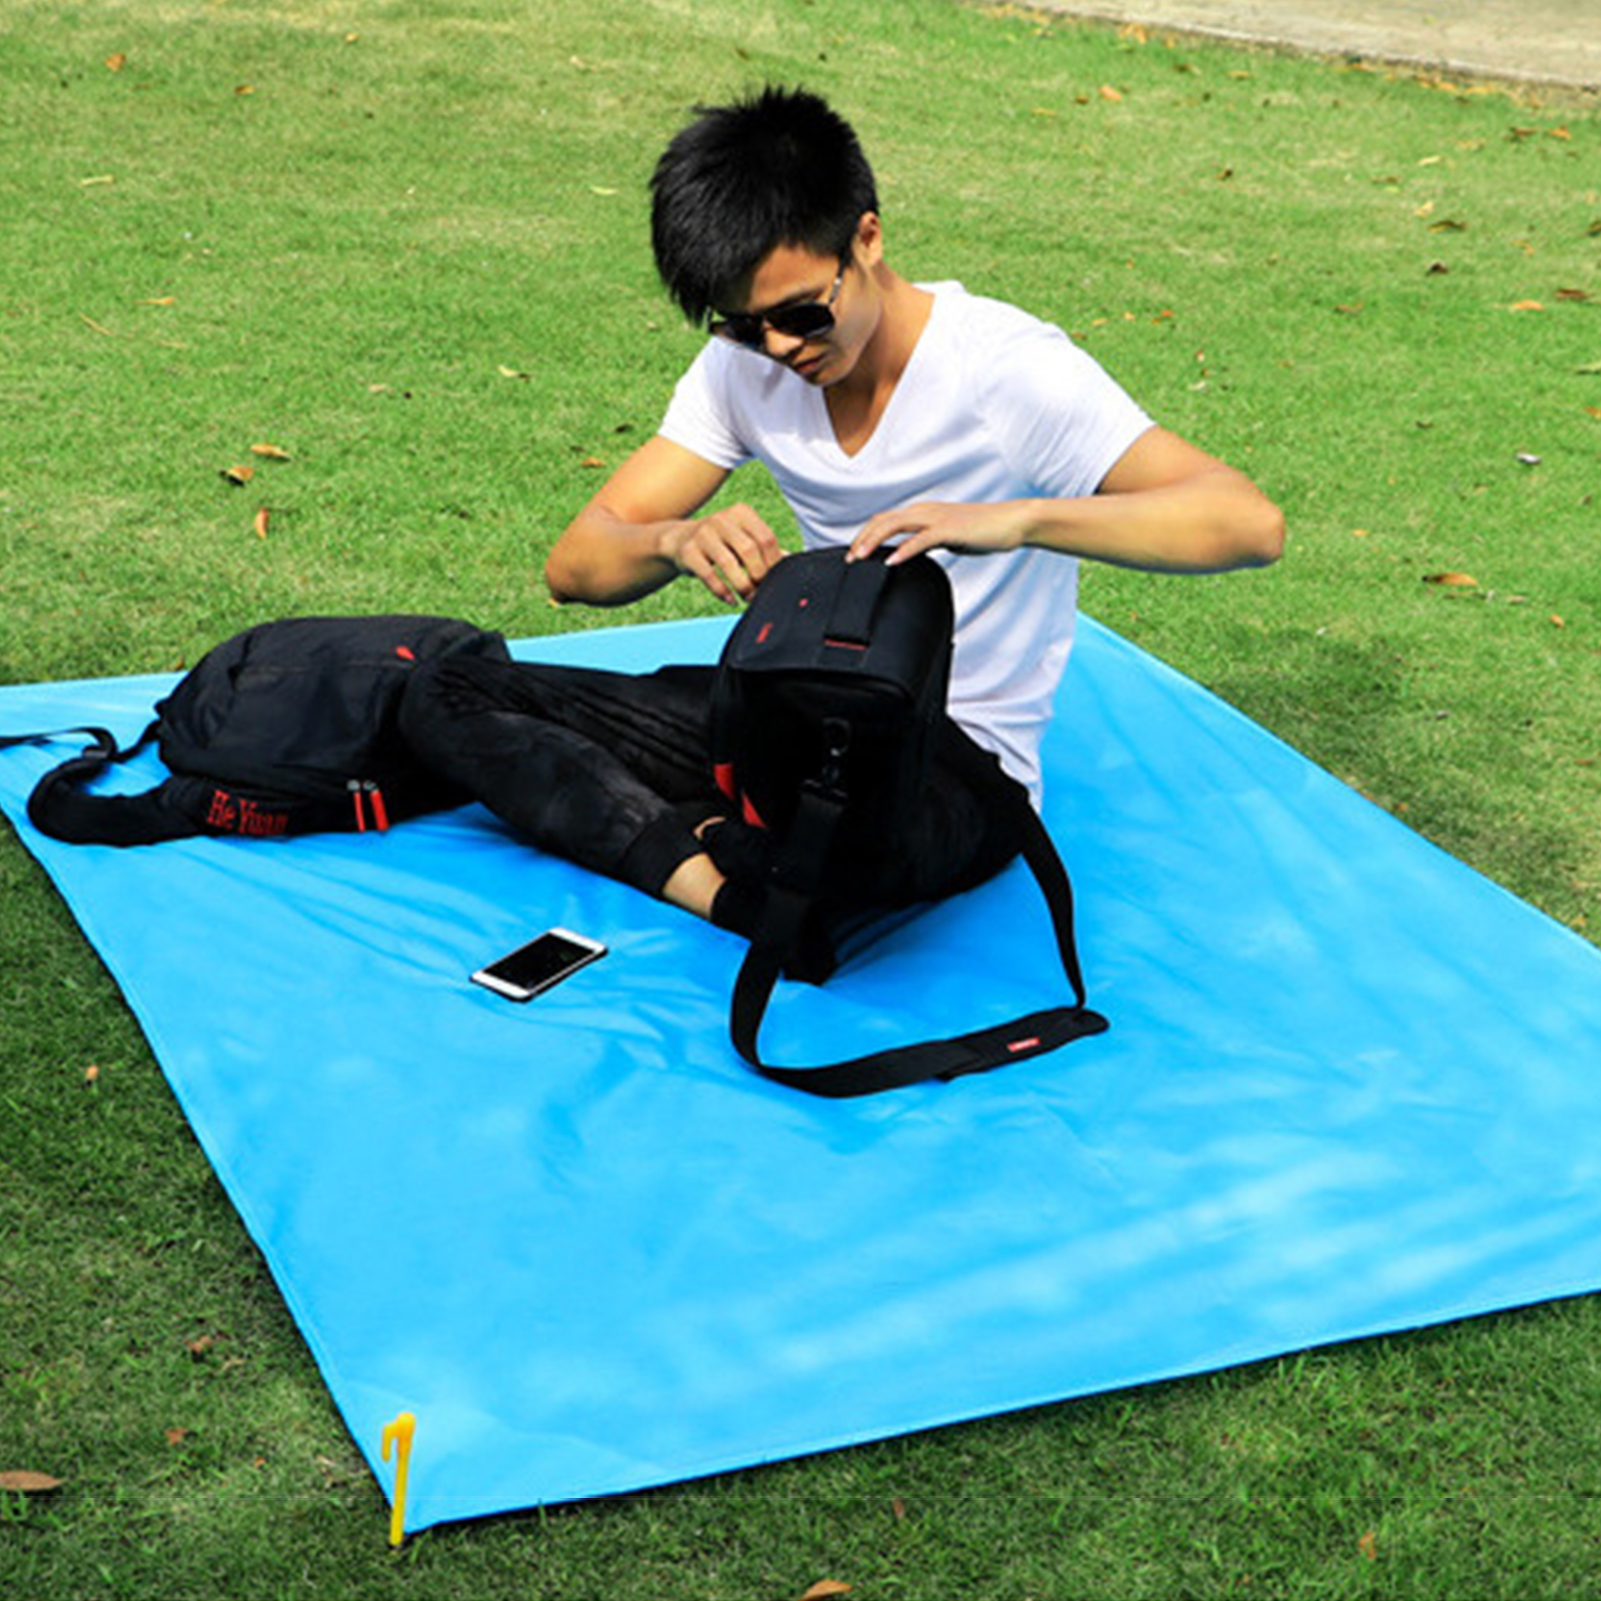 Extra Large Waterproof Picnic Blanket Travel Outdoor Beach Camping Soft Mat Rug 